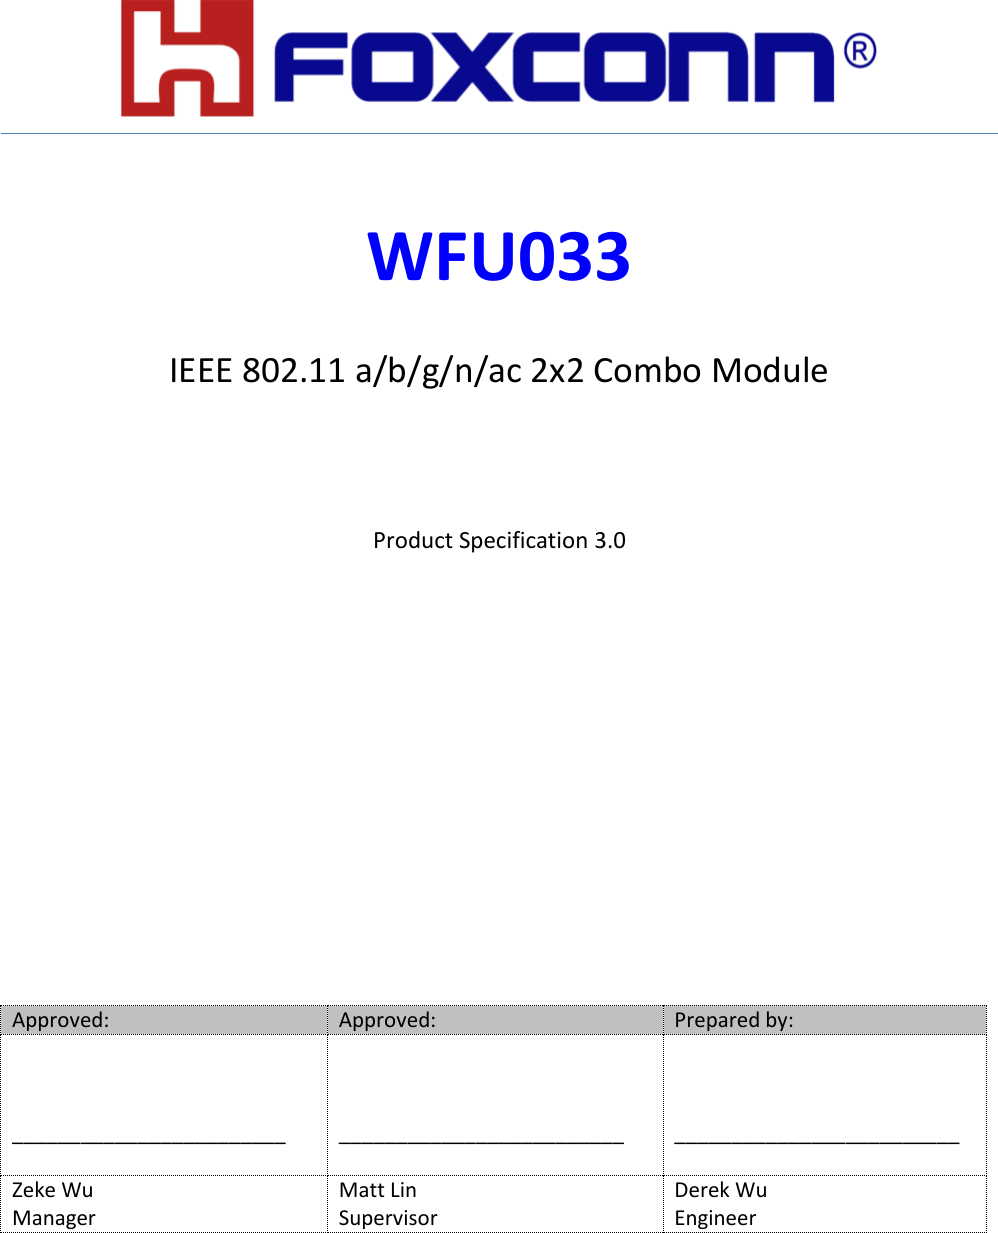         WFU033  IEEE 802.11 a/b/g/n/ac 2x2 Combo Module   Product Specification 3.0         Approved: Approved: Prepared by:    ________________________     _________________________    _________________________ Zeke Wu Matt Lin Derek Wu Manager Supervisor Engineer  